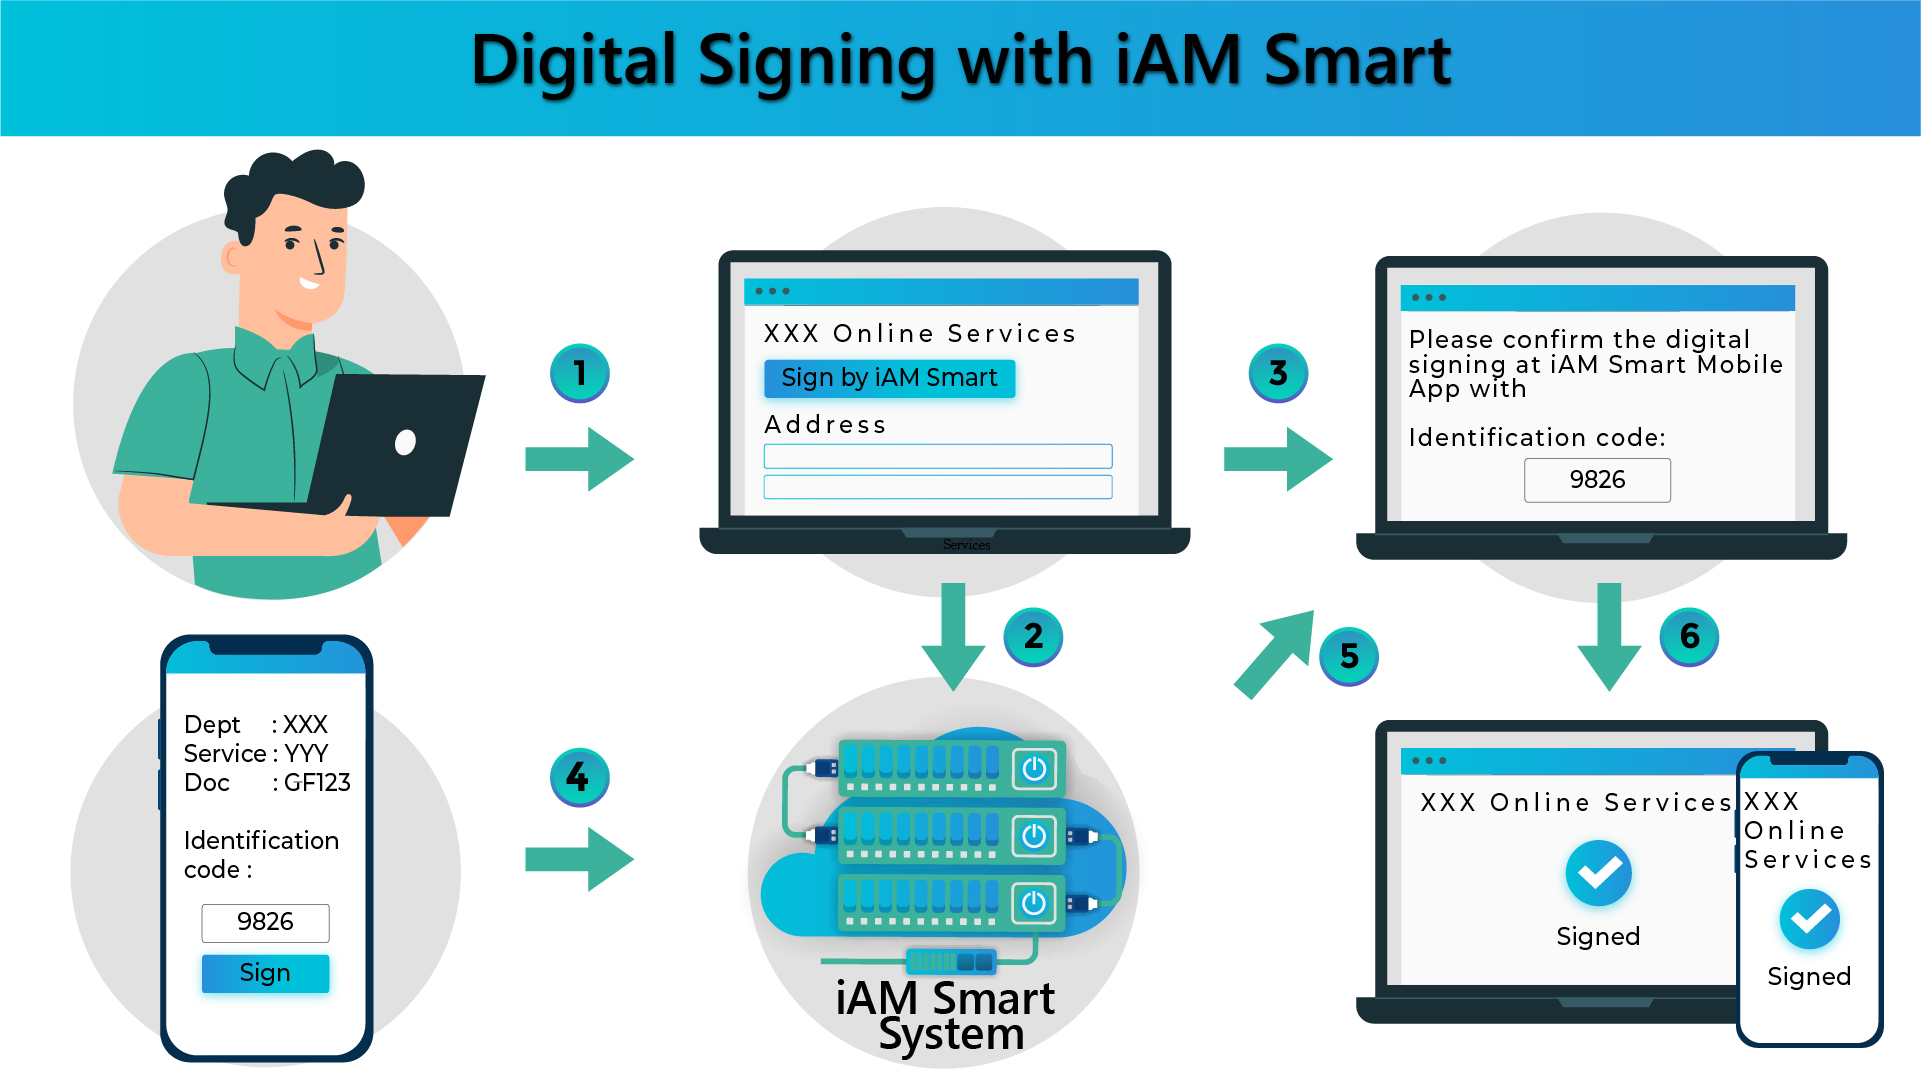 Digital Signing with "iAM Smart" 